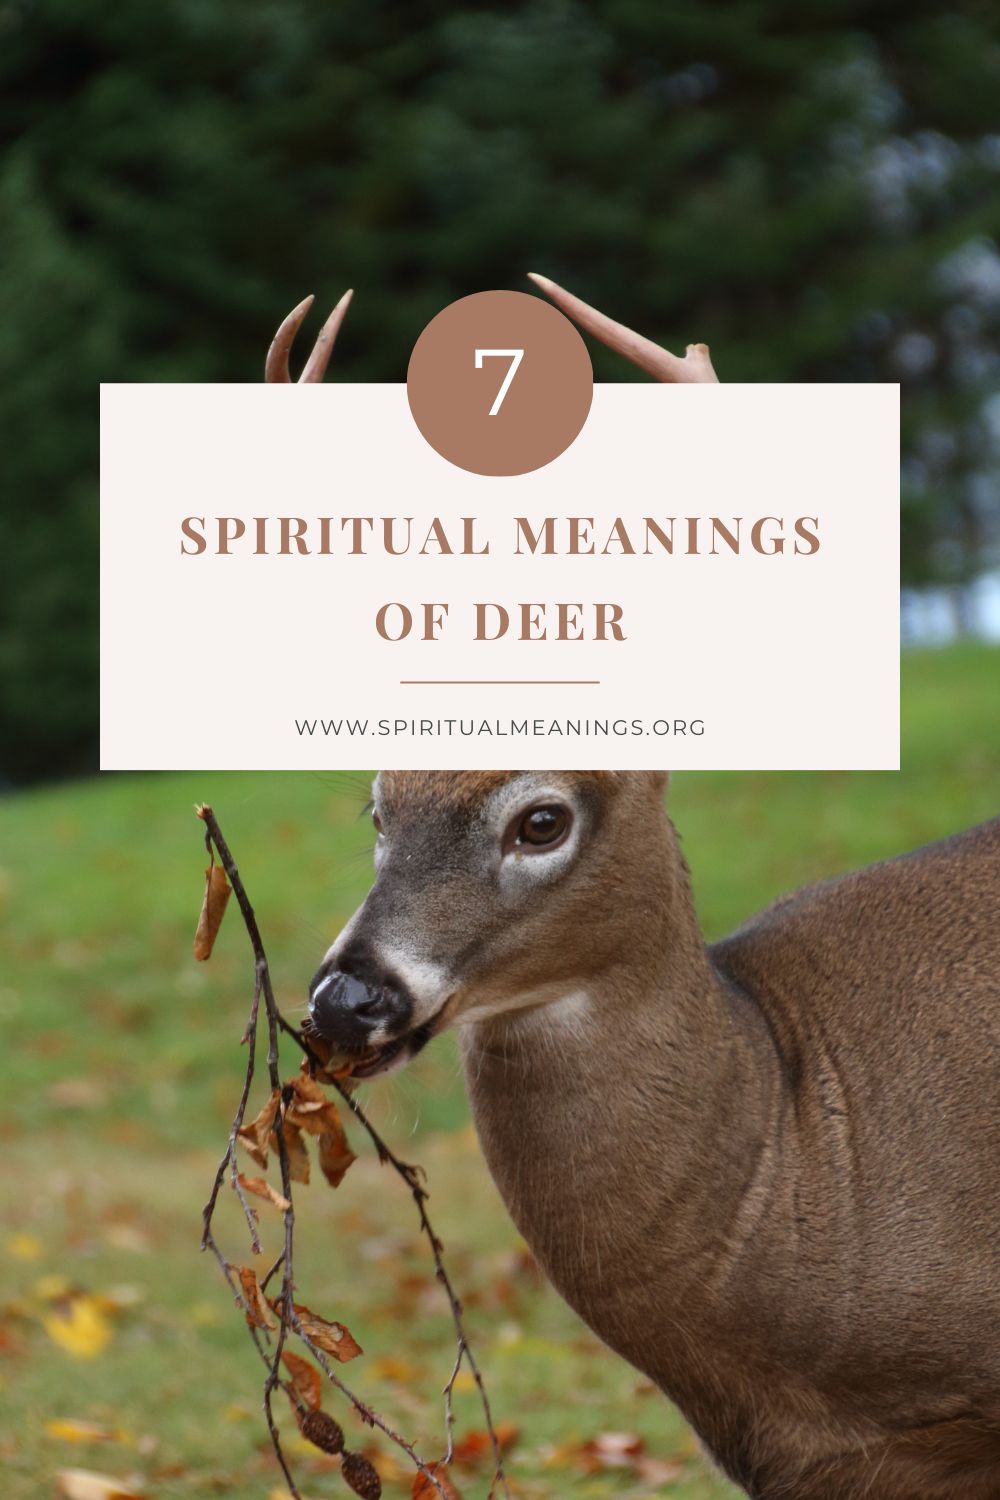 Finding the Spiritual Meaning of Deer